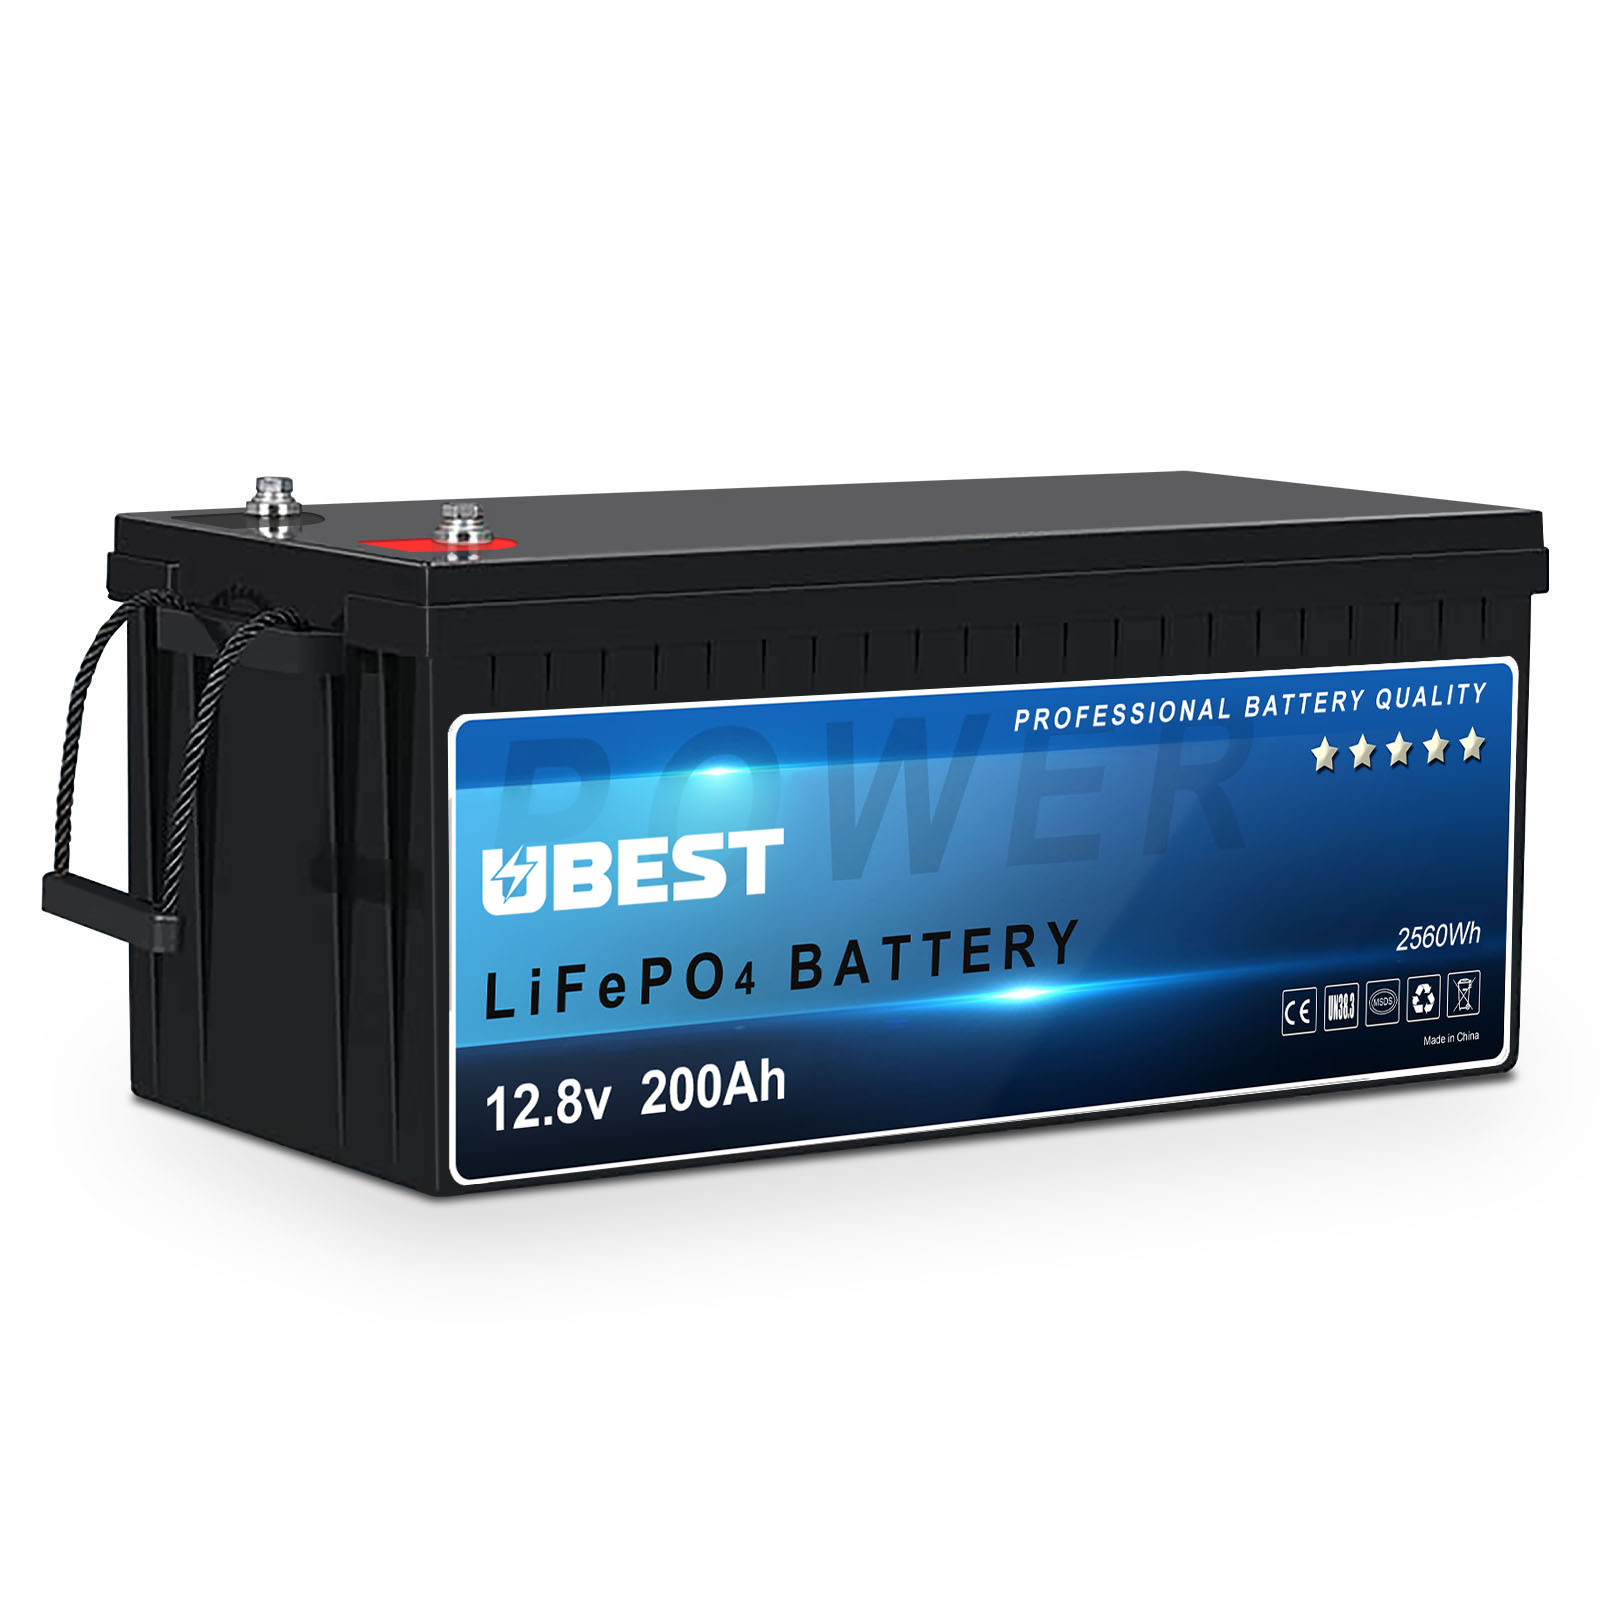 Introduction to NiCd and LiFePO4 Batteries